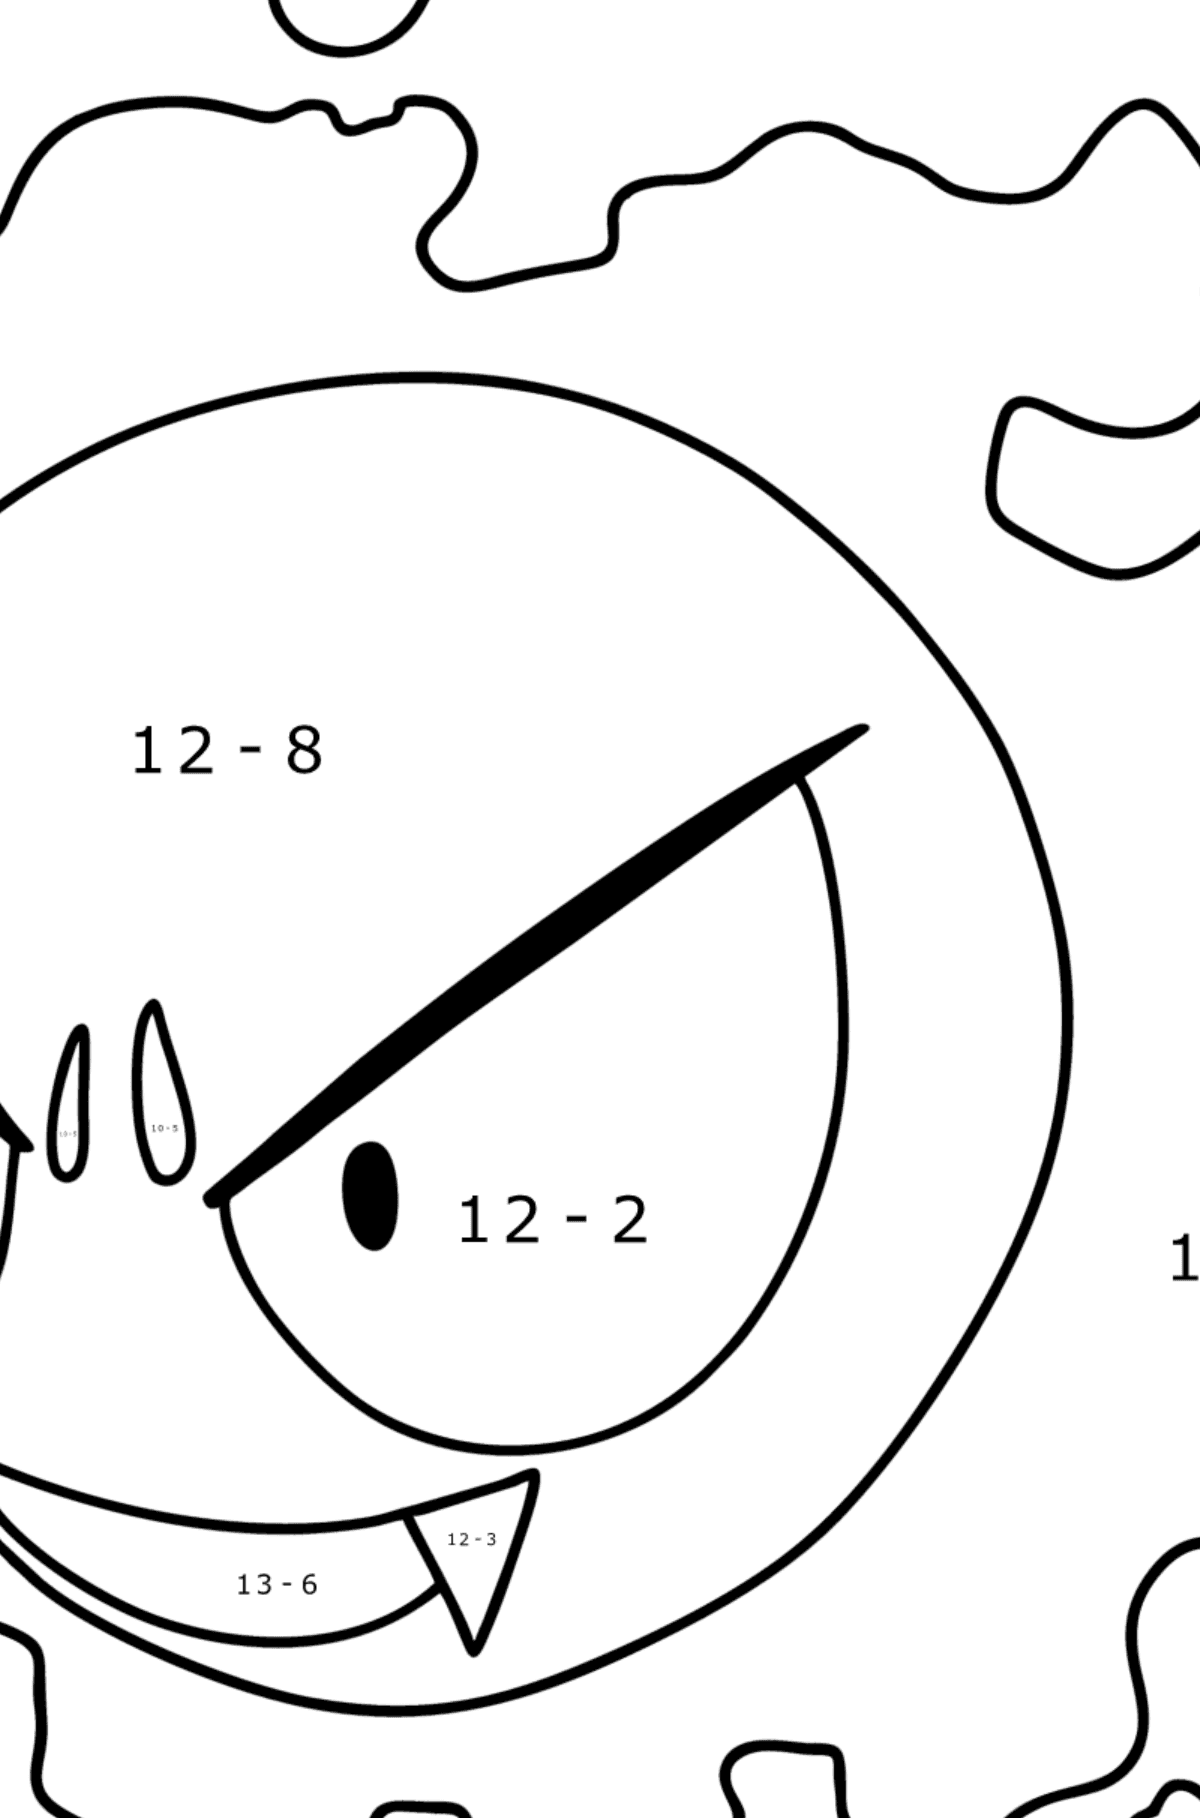 Pokémon Go Gastly coloring page - Math Coloring - Subtraction for Kids